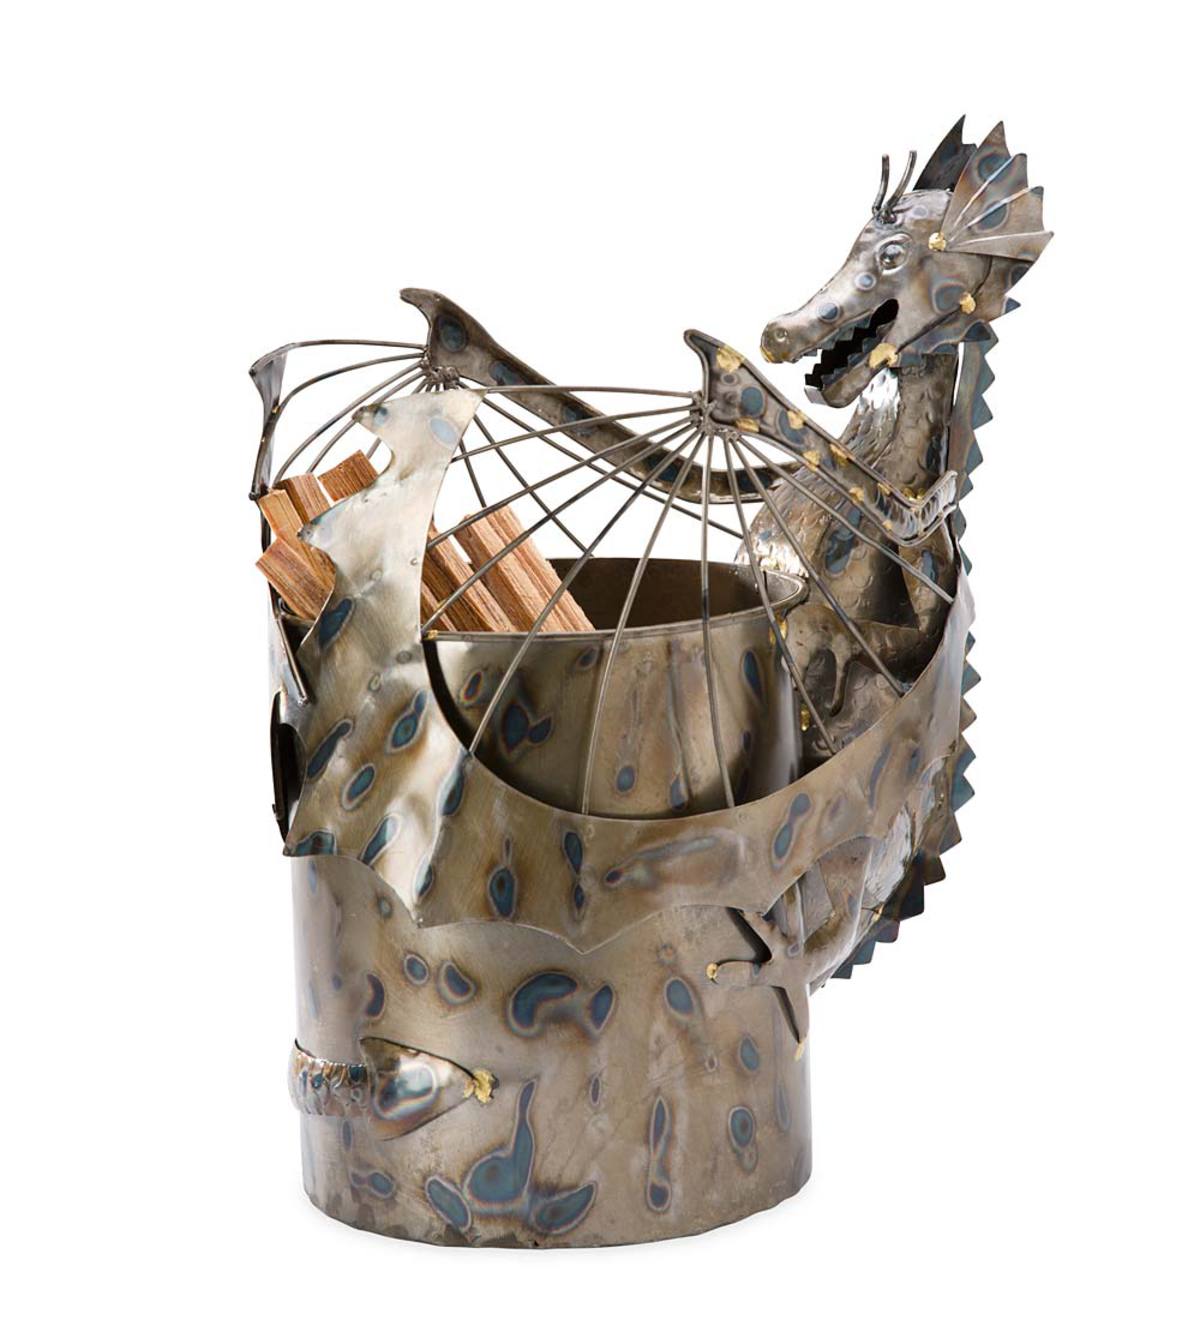 Metal Dragon Fatwood Holder with 5 lbs. of Fatwood  - Free 2 Day Delivery - Silver